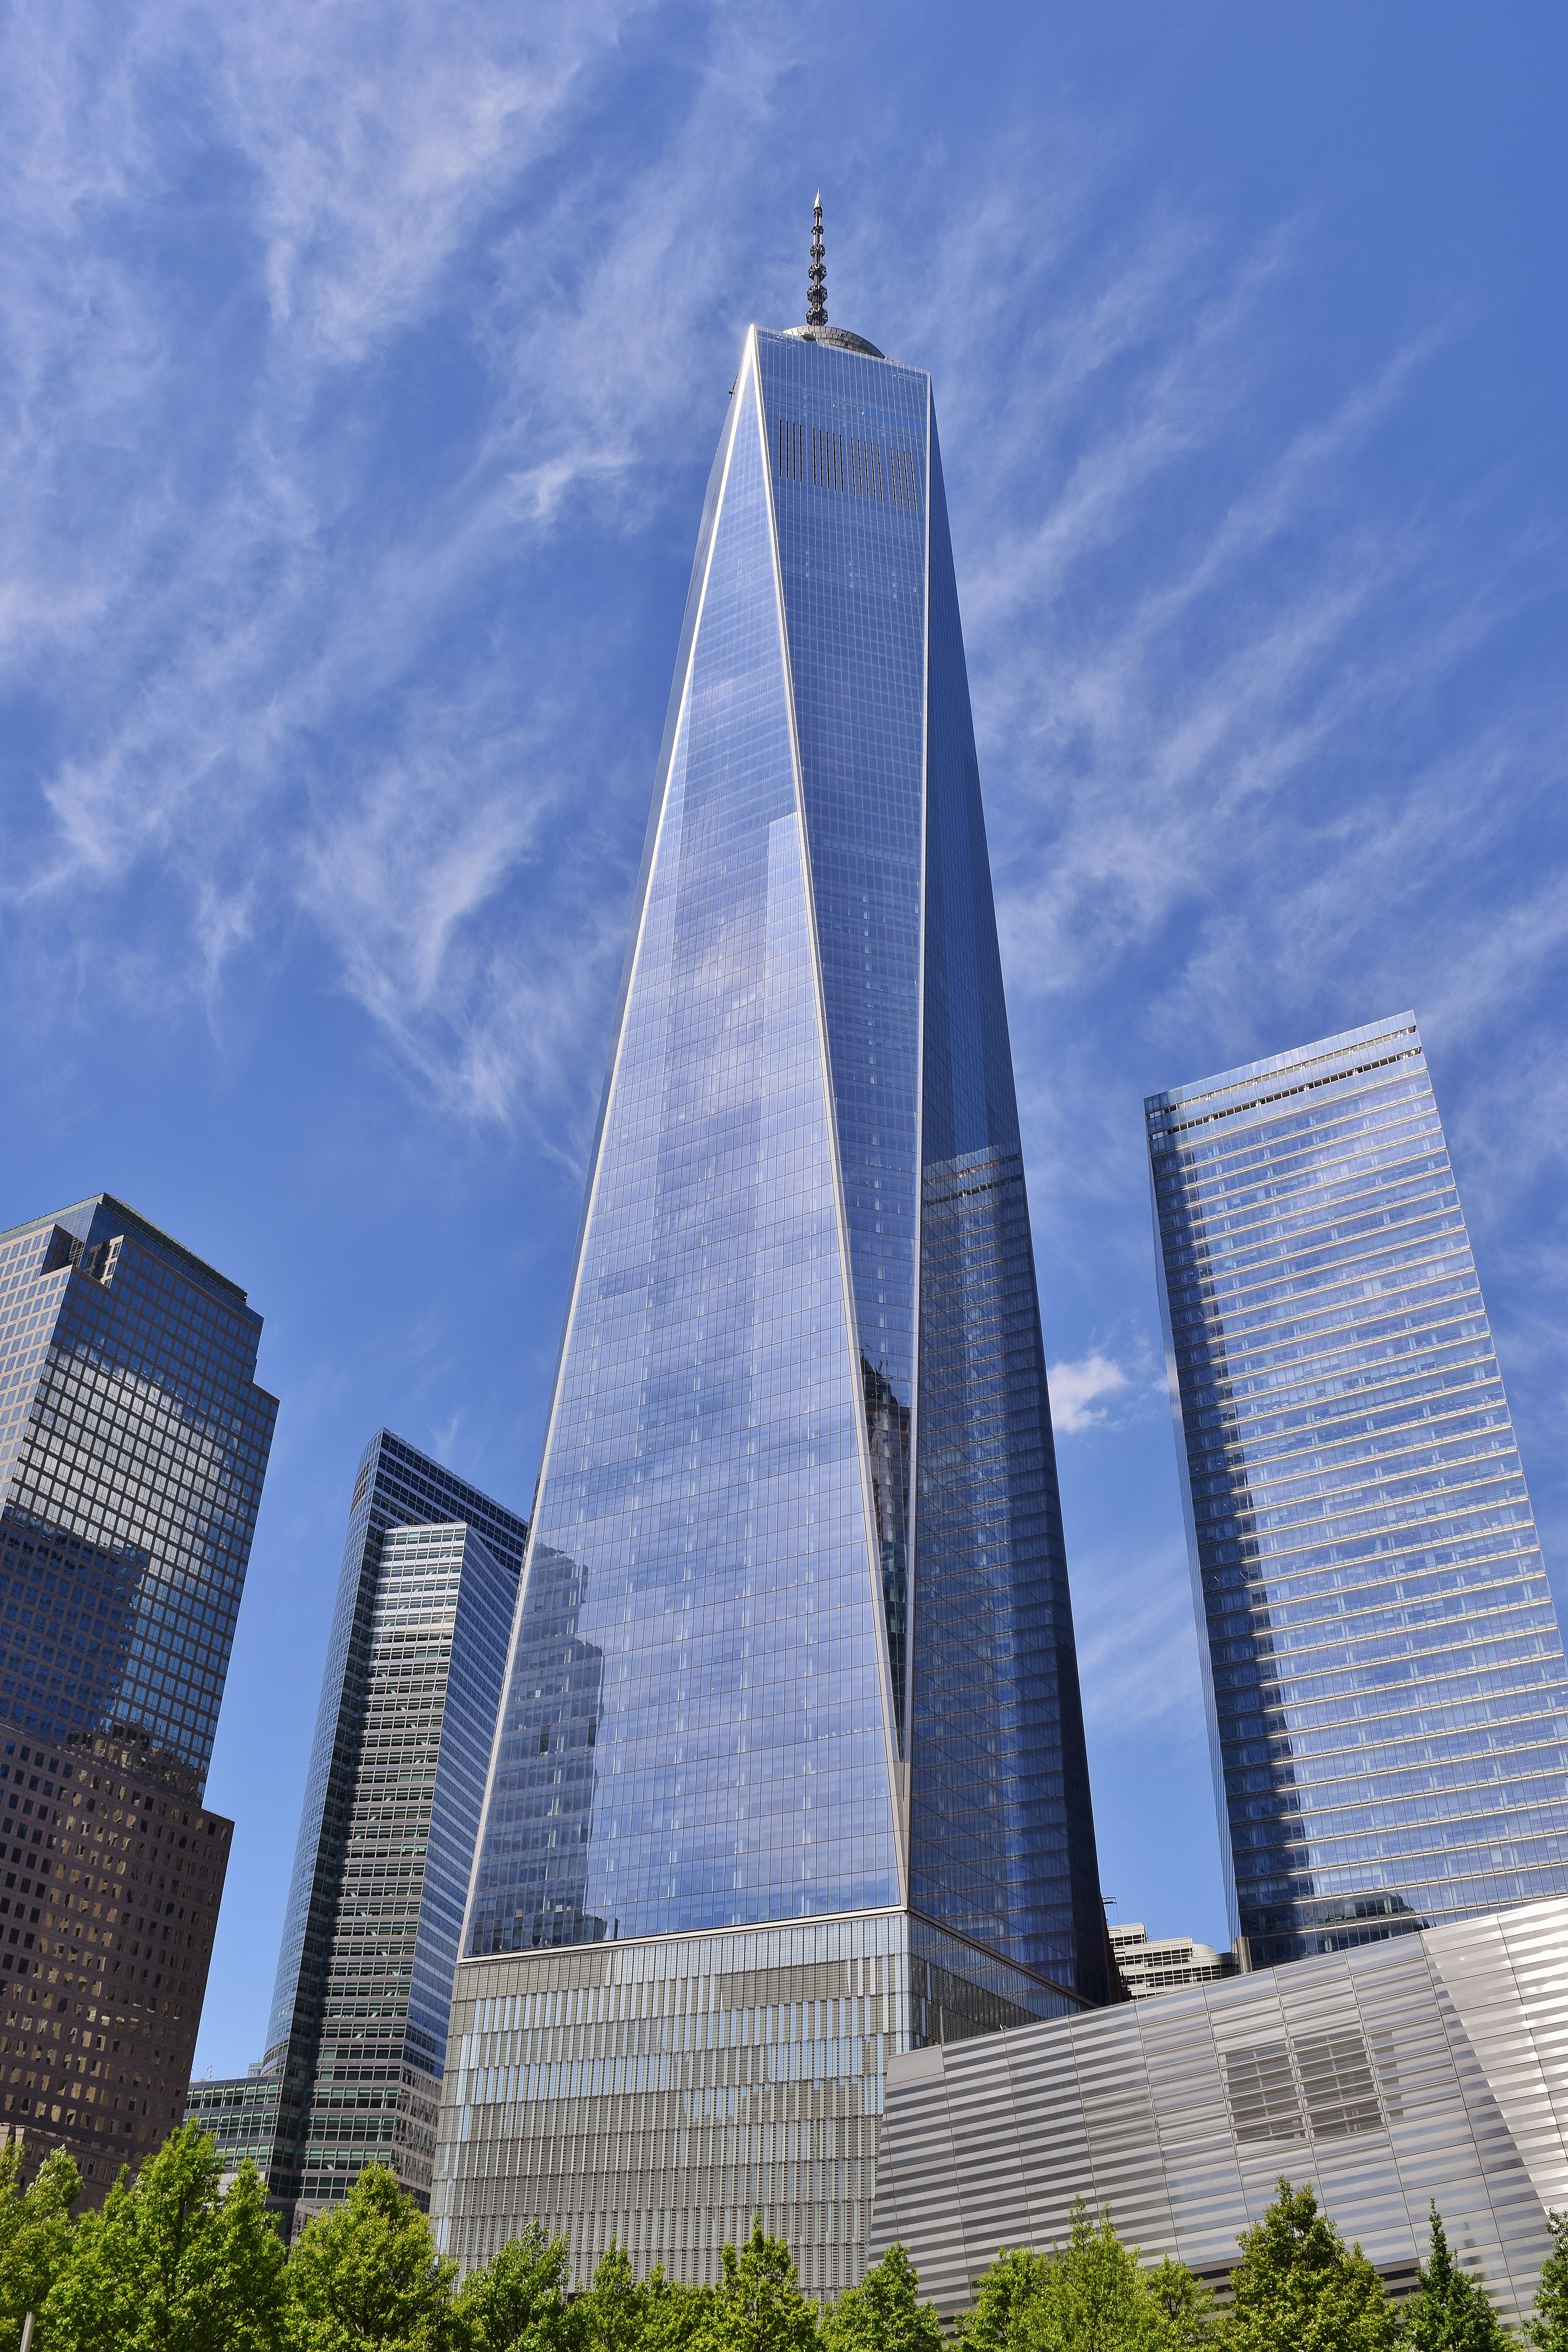 A vertical shot of the Freedom Tower in Lower Manhattan.